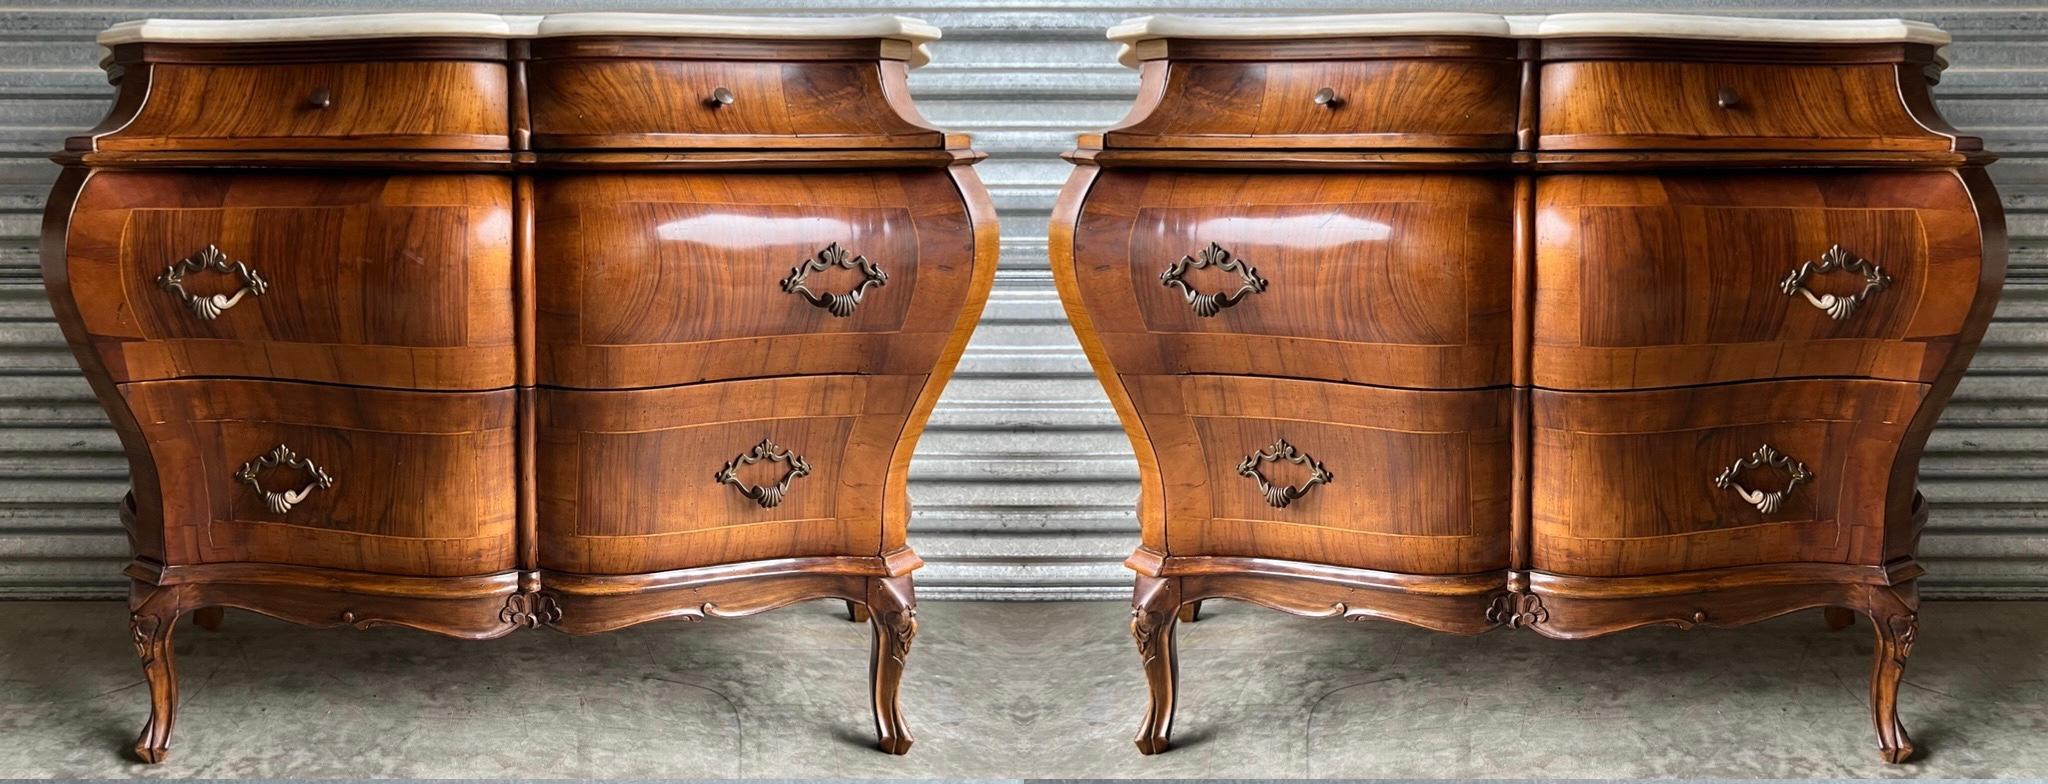 This is a lovely pair of Louis XV style burl walnut inlaid chests hand crafted in Italy for Bethlehem Furniture. The white marble tops are not attached. The brass hardware is original. Note the beautiful serpentine lines across the bombay form!